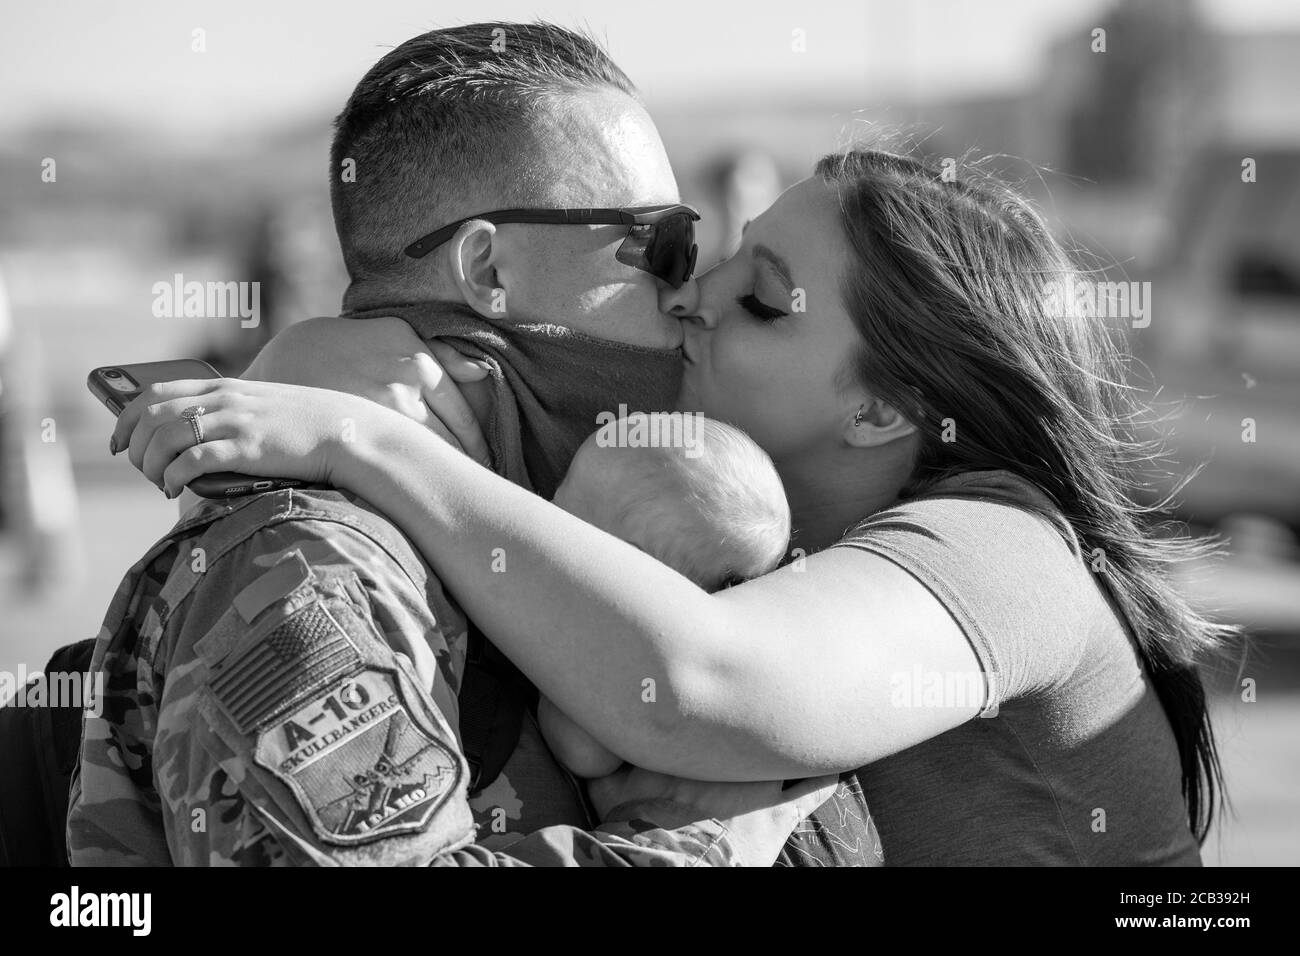 A COVID mask doesn’t stop a welcome home kiss as 124th Fighter Wing Airmen return home from deployment, August 8, 2020, in Boise, Idaho. (USA) Stock Photo